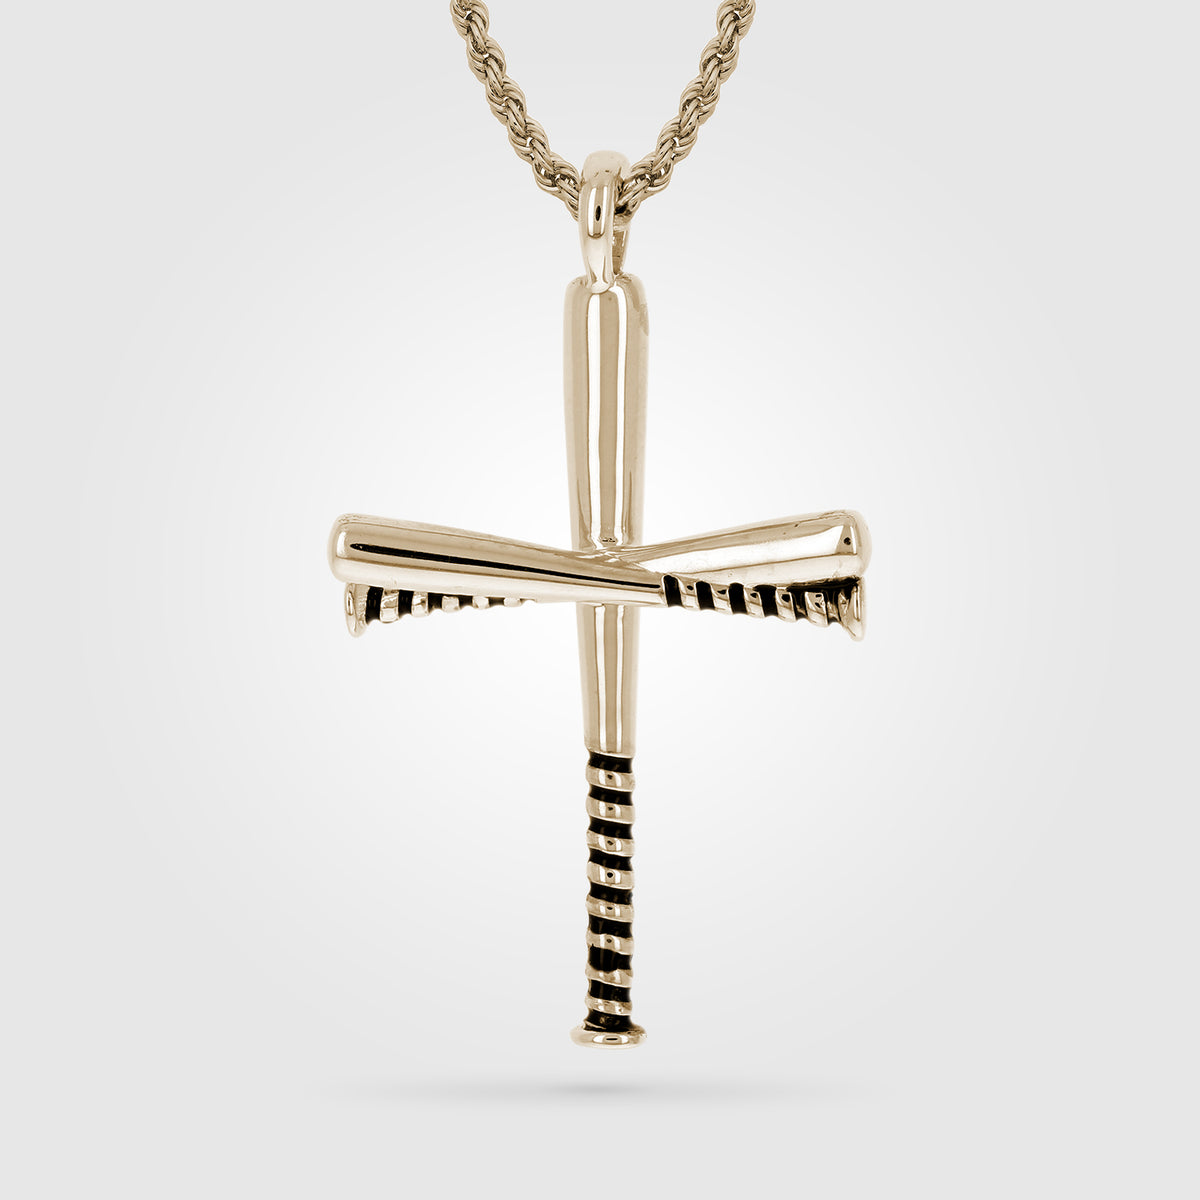 Golden Baseball Cross with Home Plate Pendant and Chain (FREE SHIPPING –  HOF JEWELRY